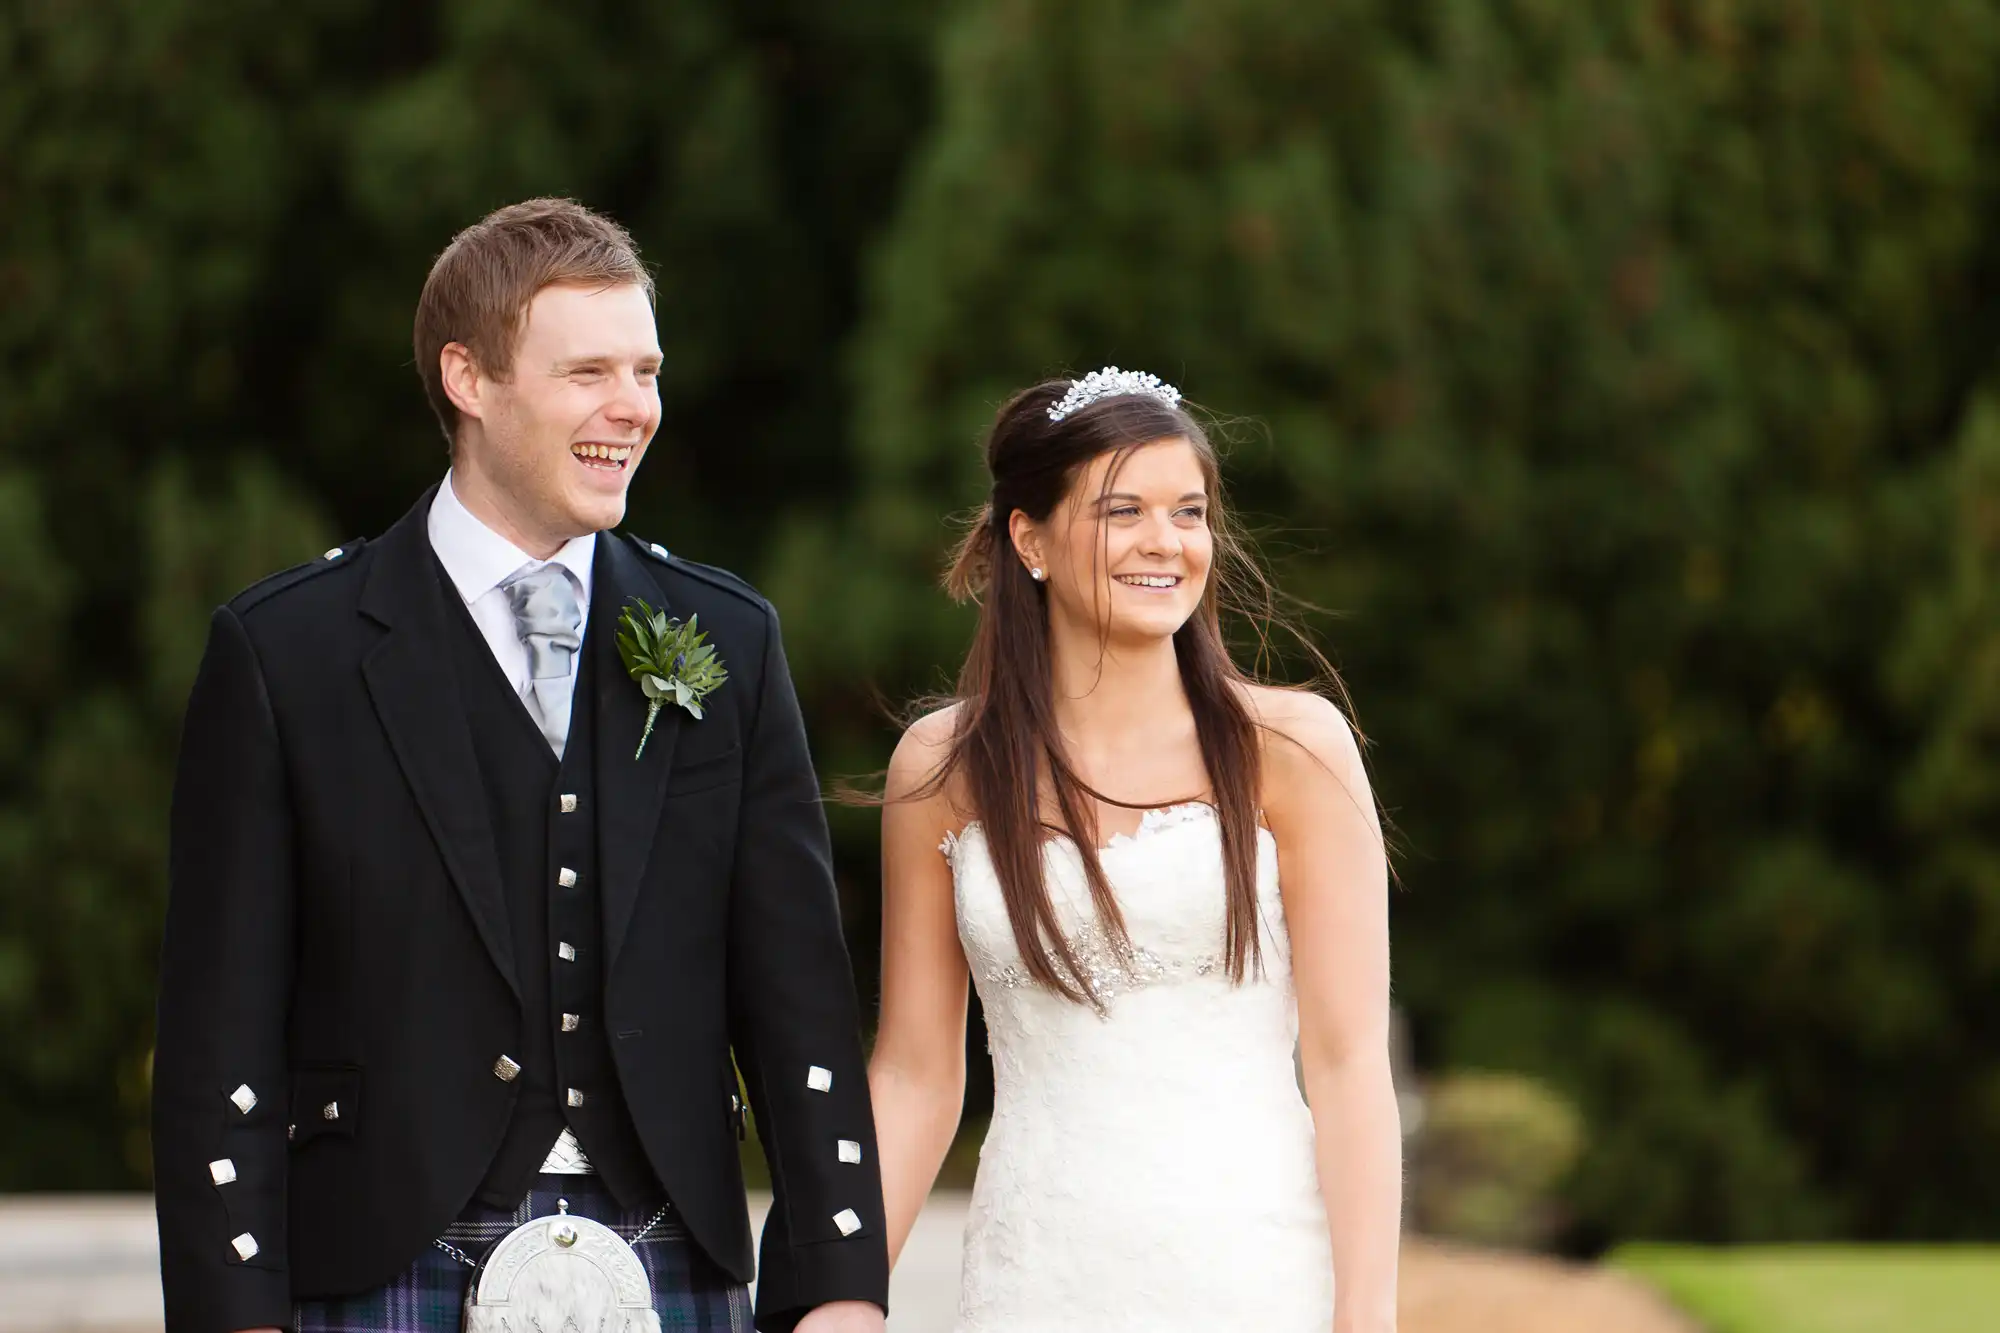 A bride and groom smiling and walking outdoors, the groom in a traditional kilt and the bride in a white dress.